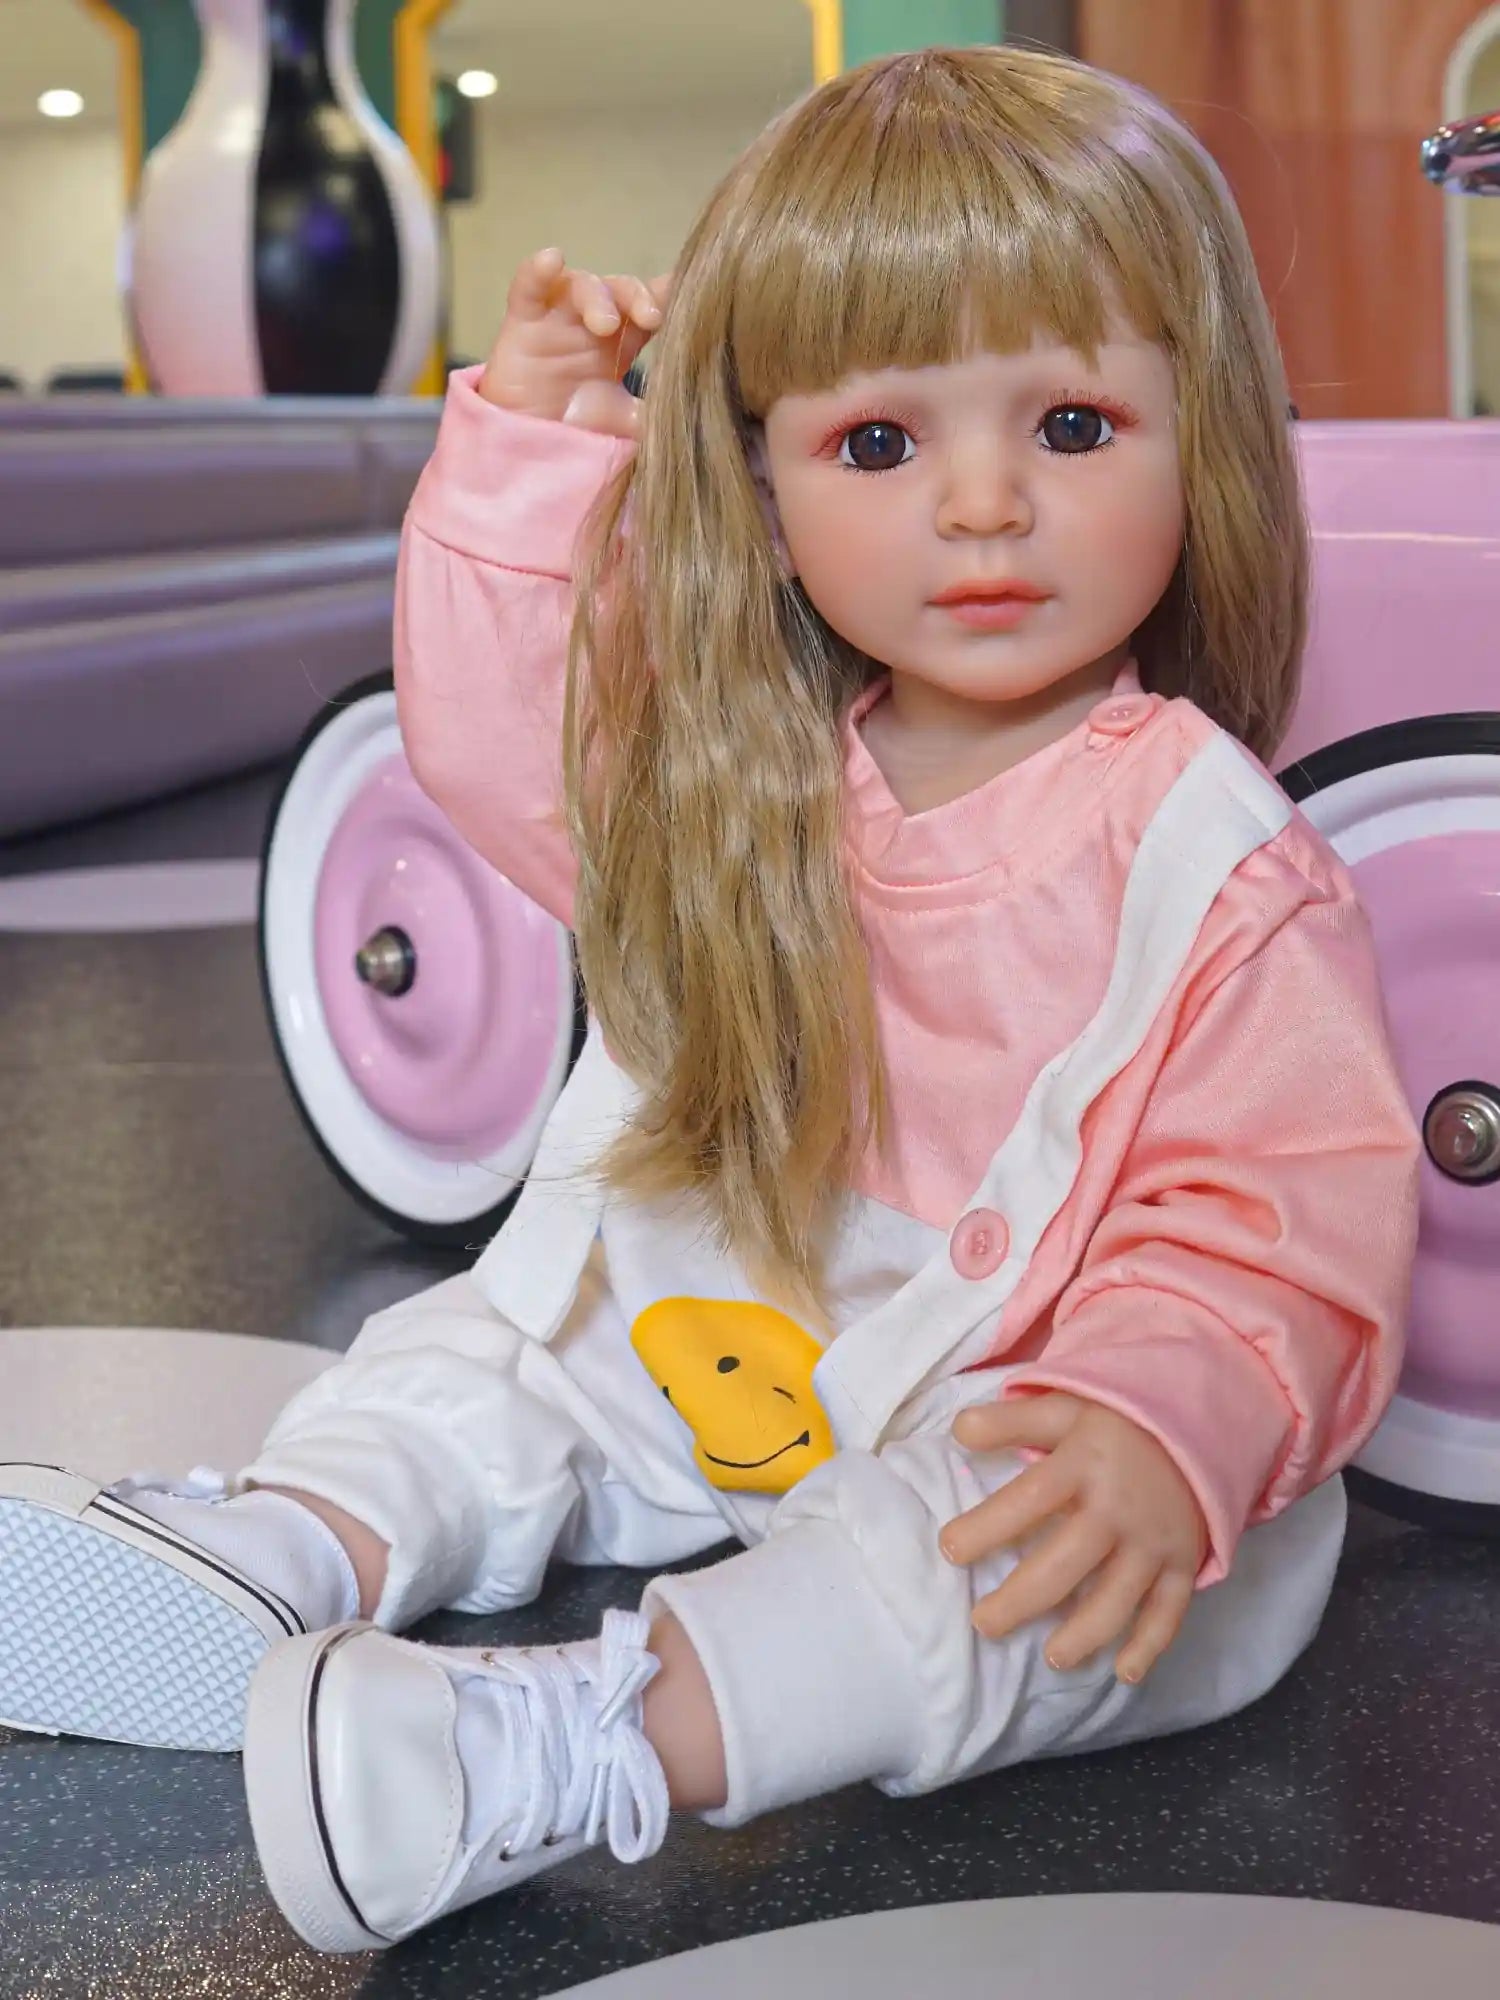 Blonde-haired doll in a pink top, holding a bright yellow ball, seated on a gray floor with play equipment nearby.